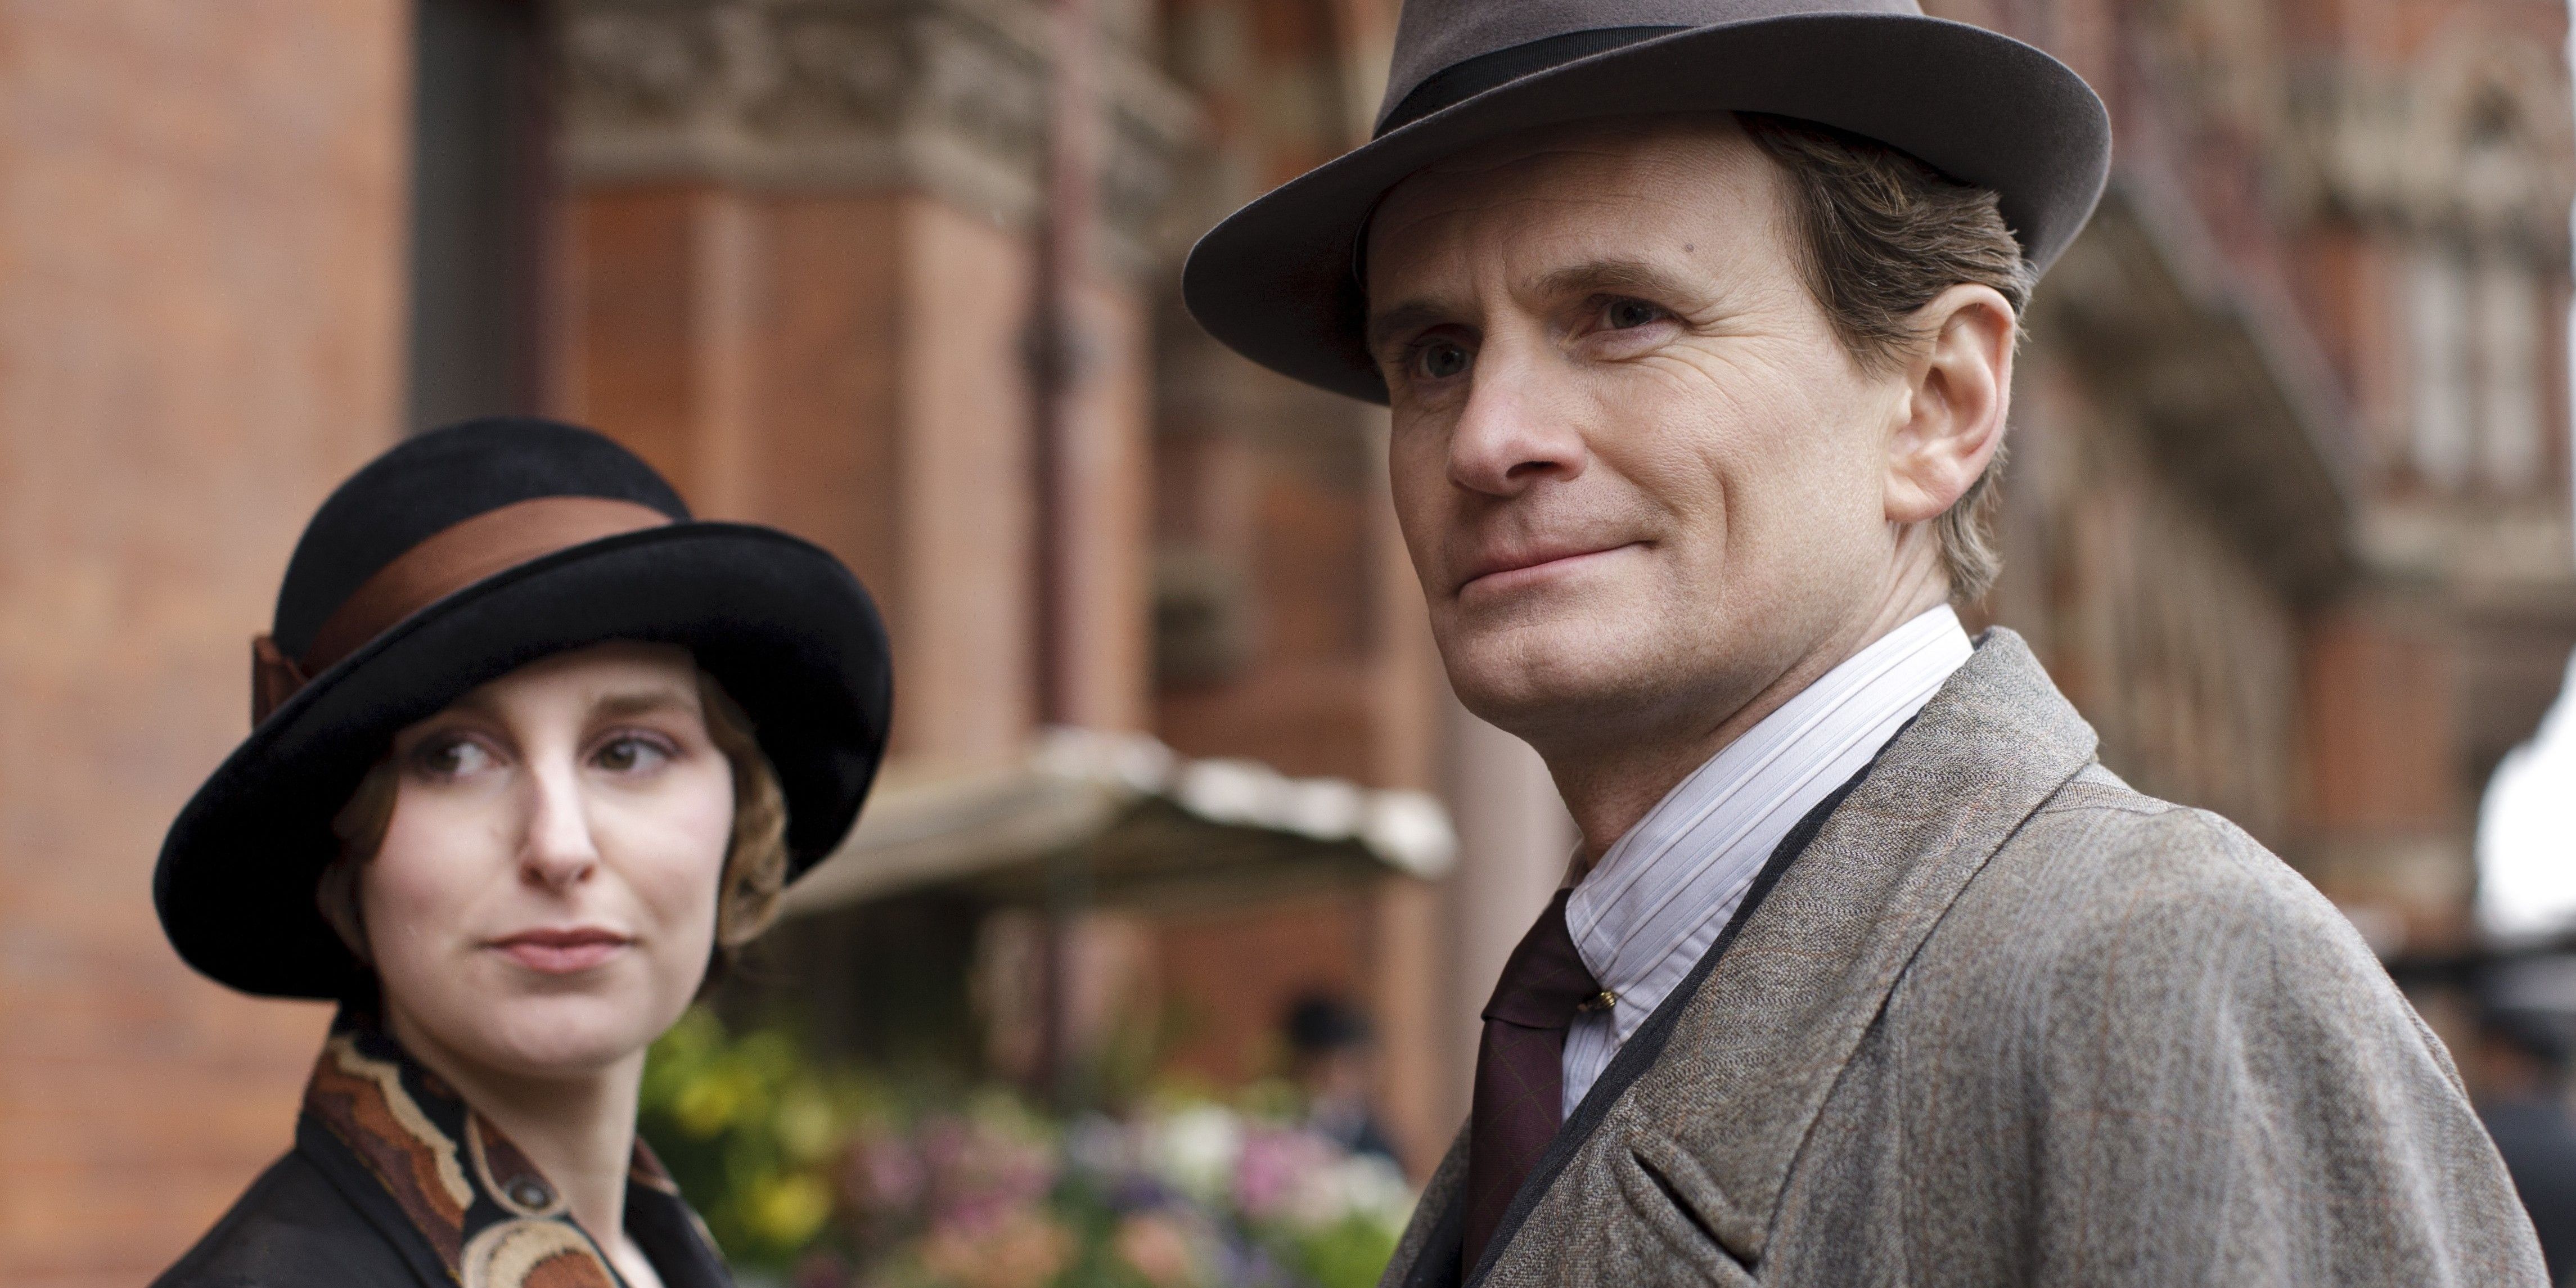 Edith and Michael in Downton Abbey.